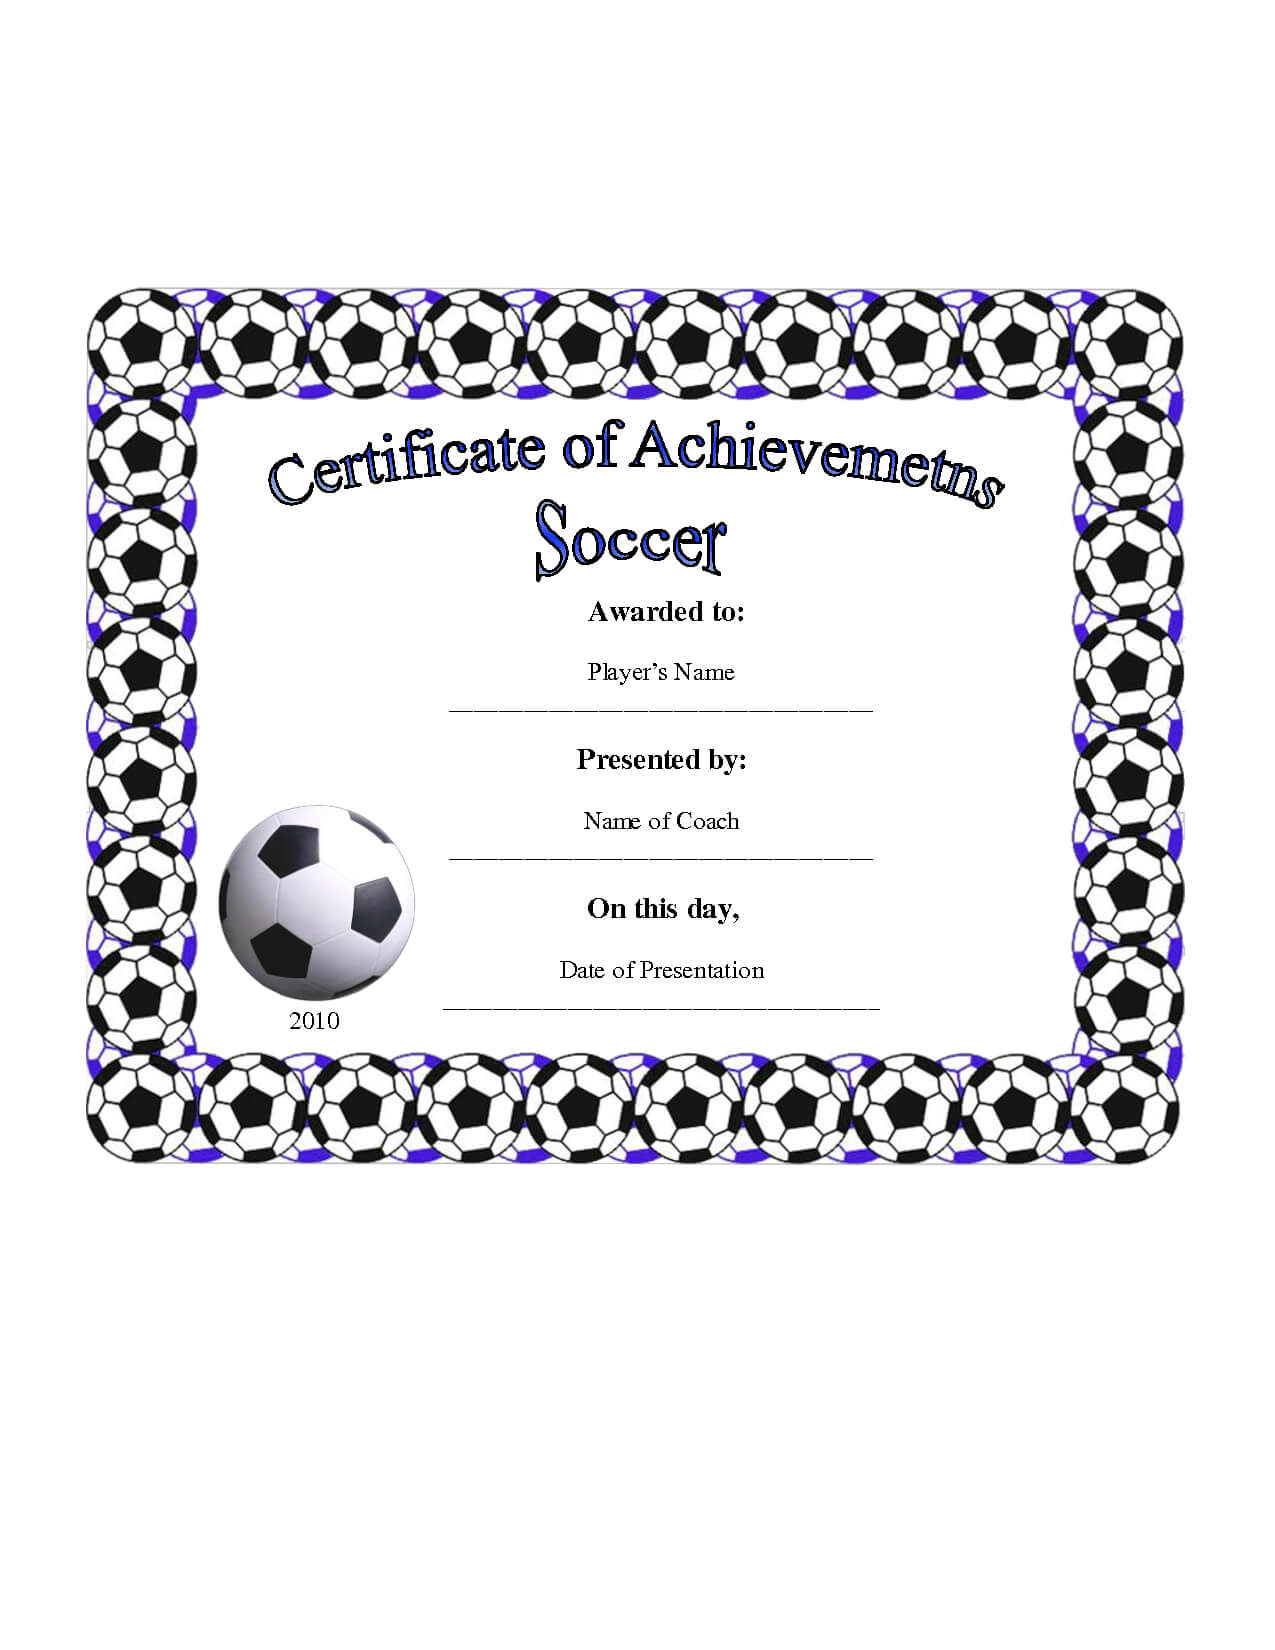 Free Soccer Certificate Templates ] – Soccer Certificate Regarding Soccer Award Certificate Templates Free